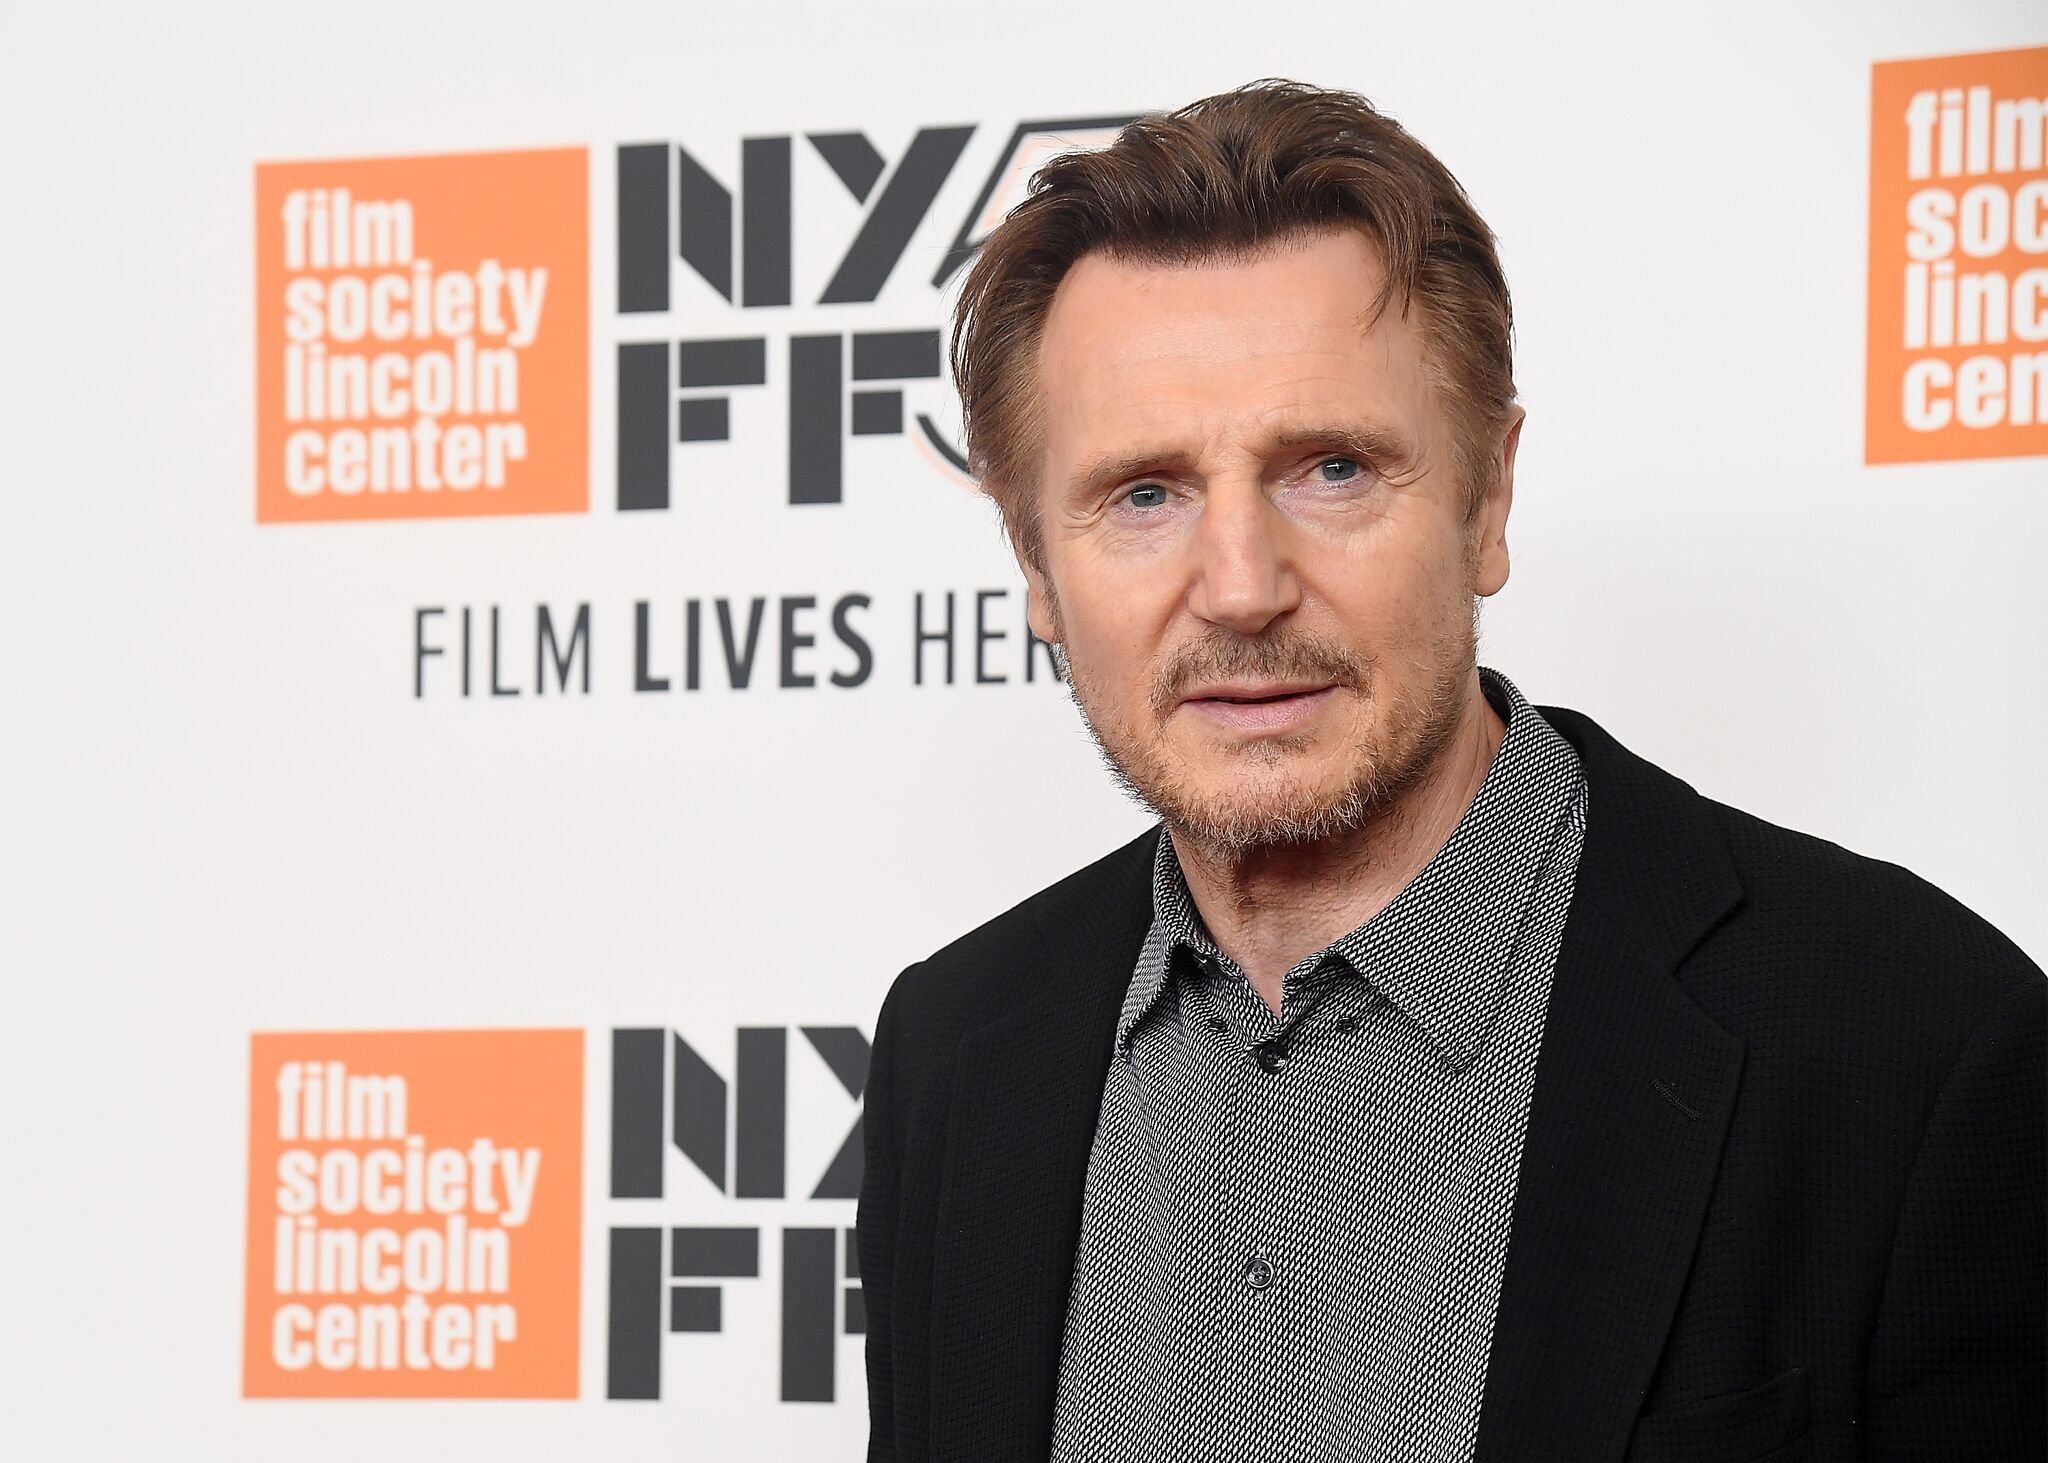 Liam Neeson at the screening of "The Ballad of Buster Scruggs" | Source: Getty Images